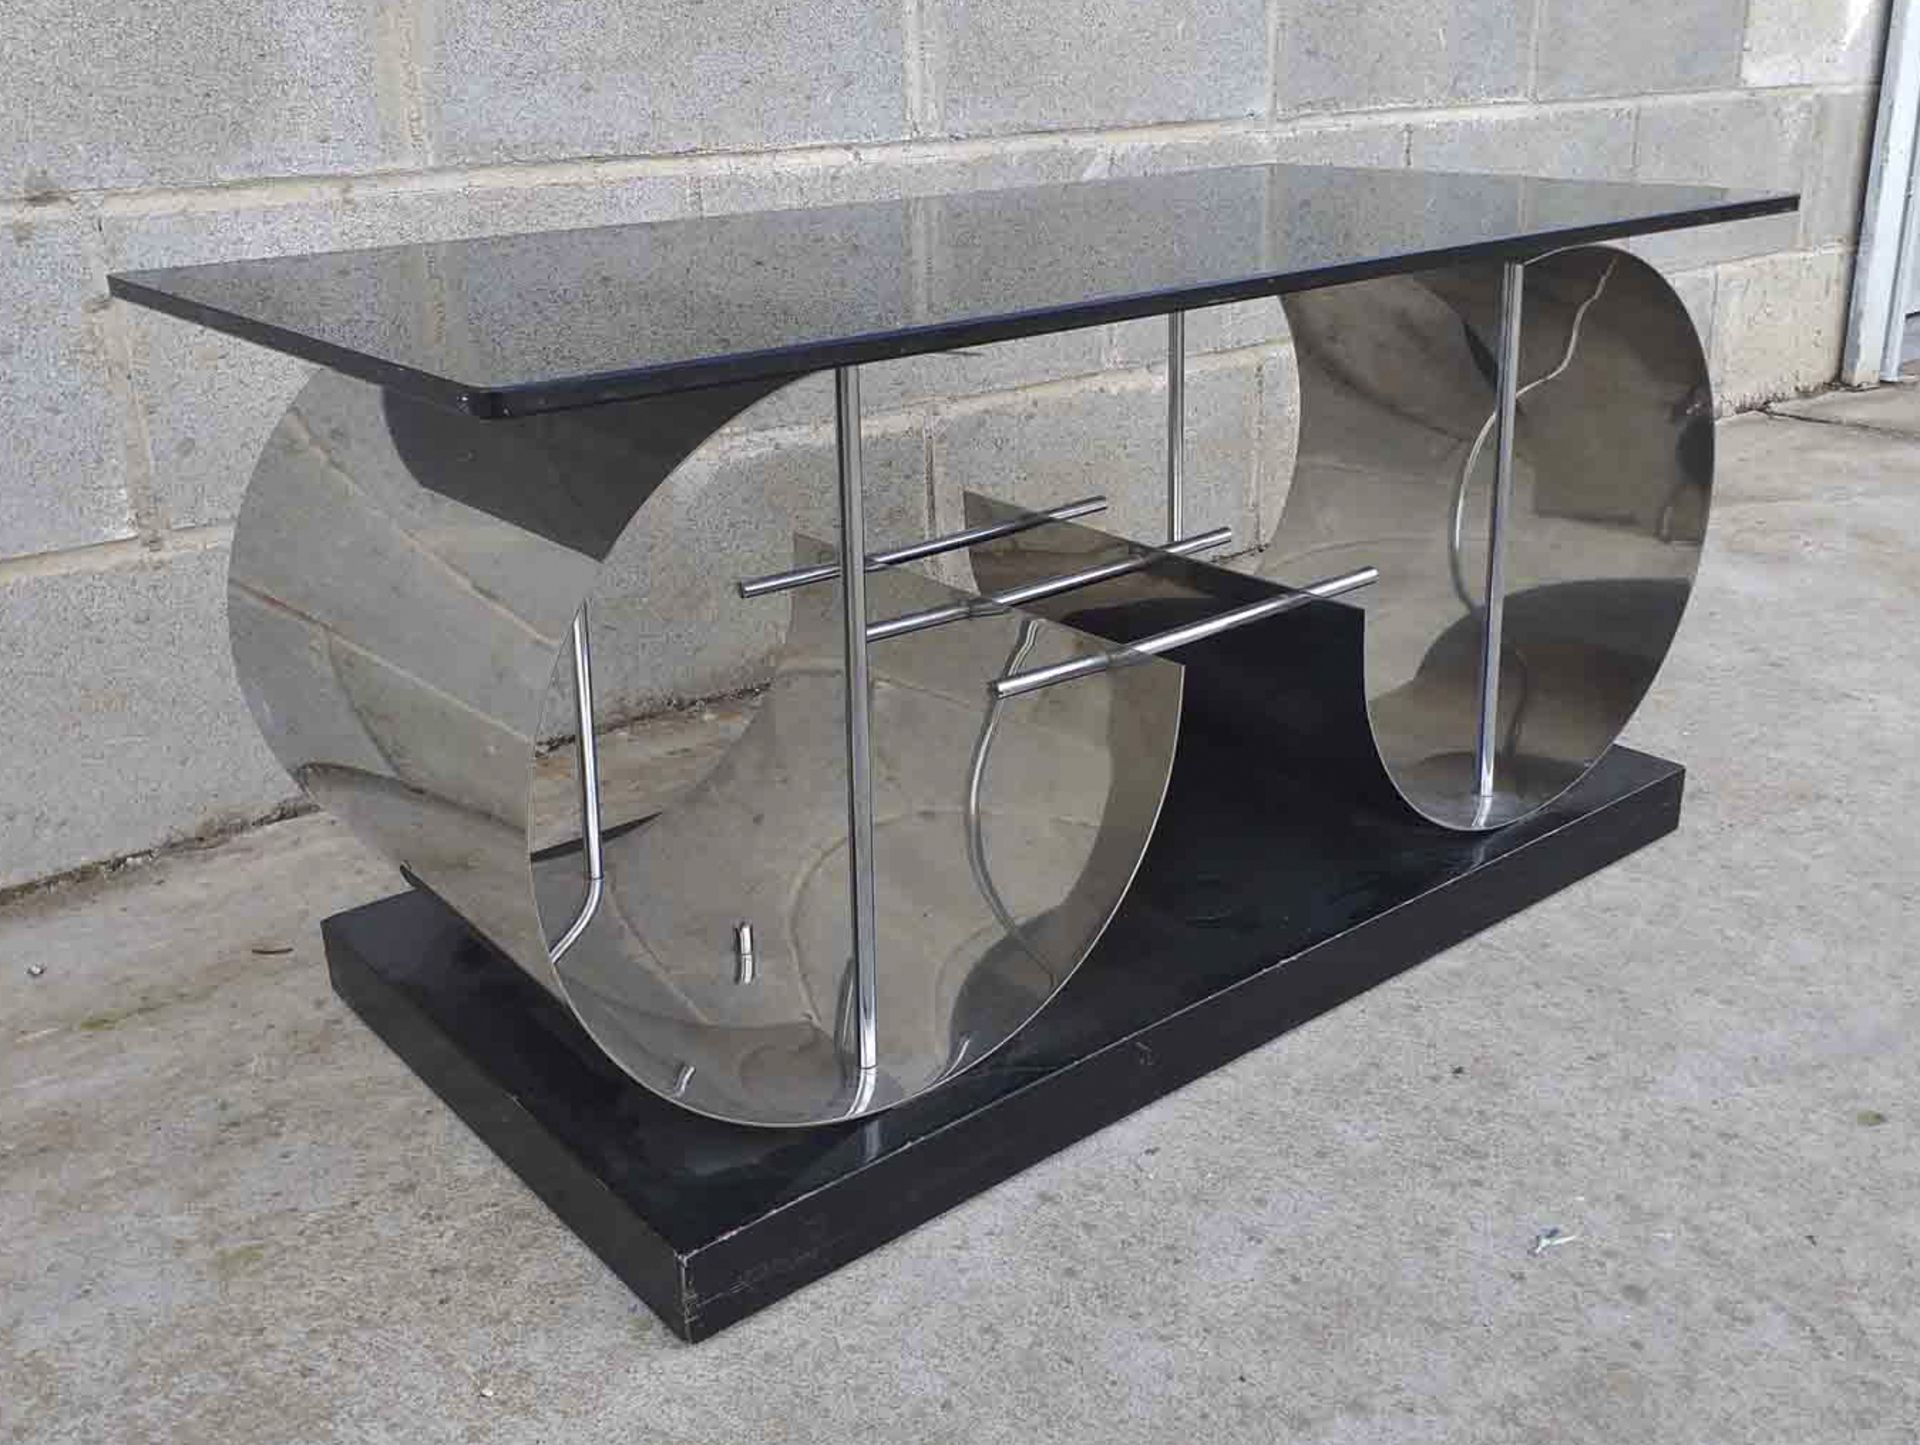 Important Italian Art Deco sideboard table in black marble and polished steel, 1950s - 1960s - Image 4 of 4